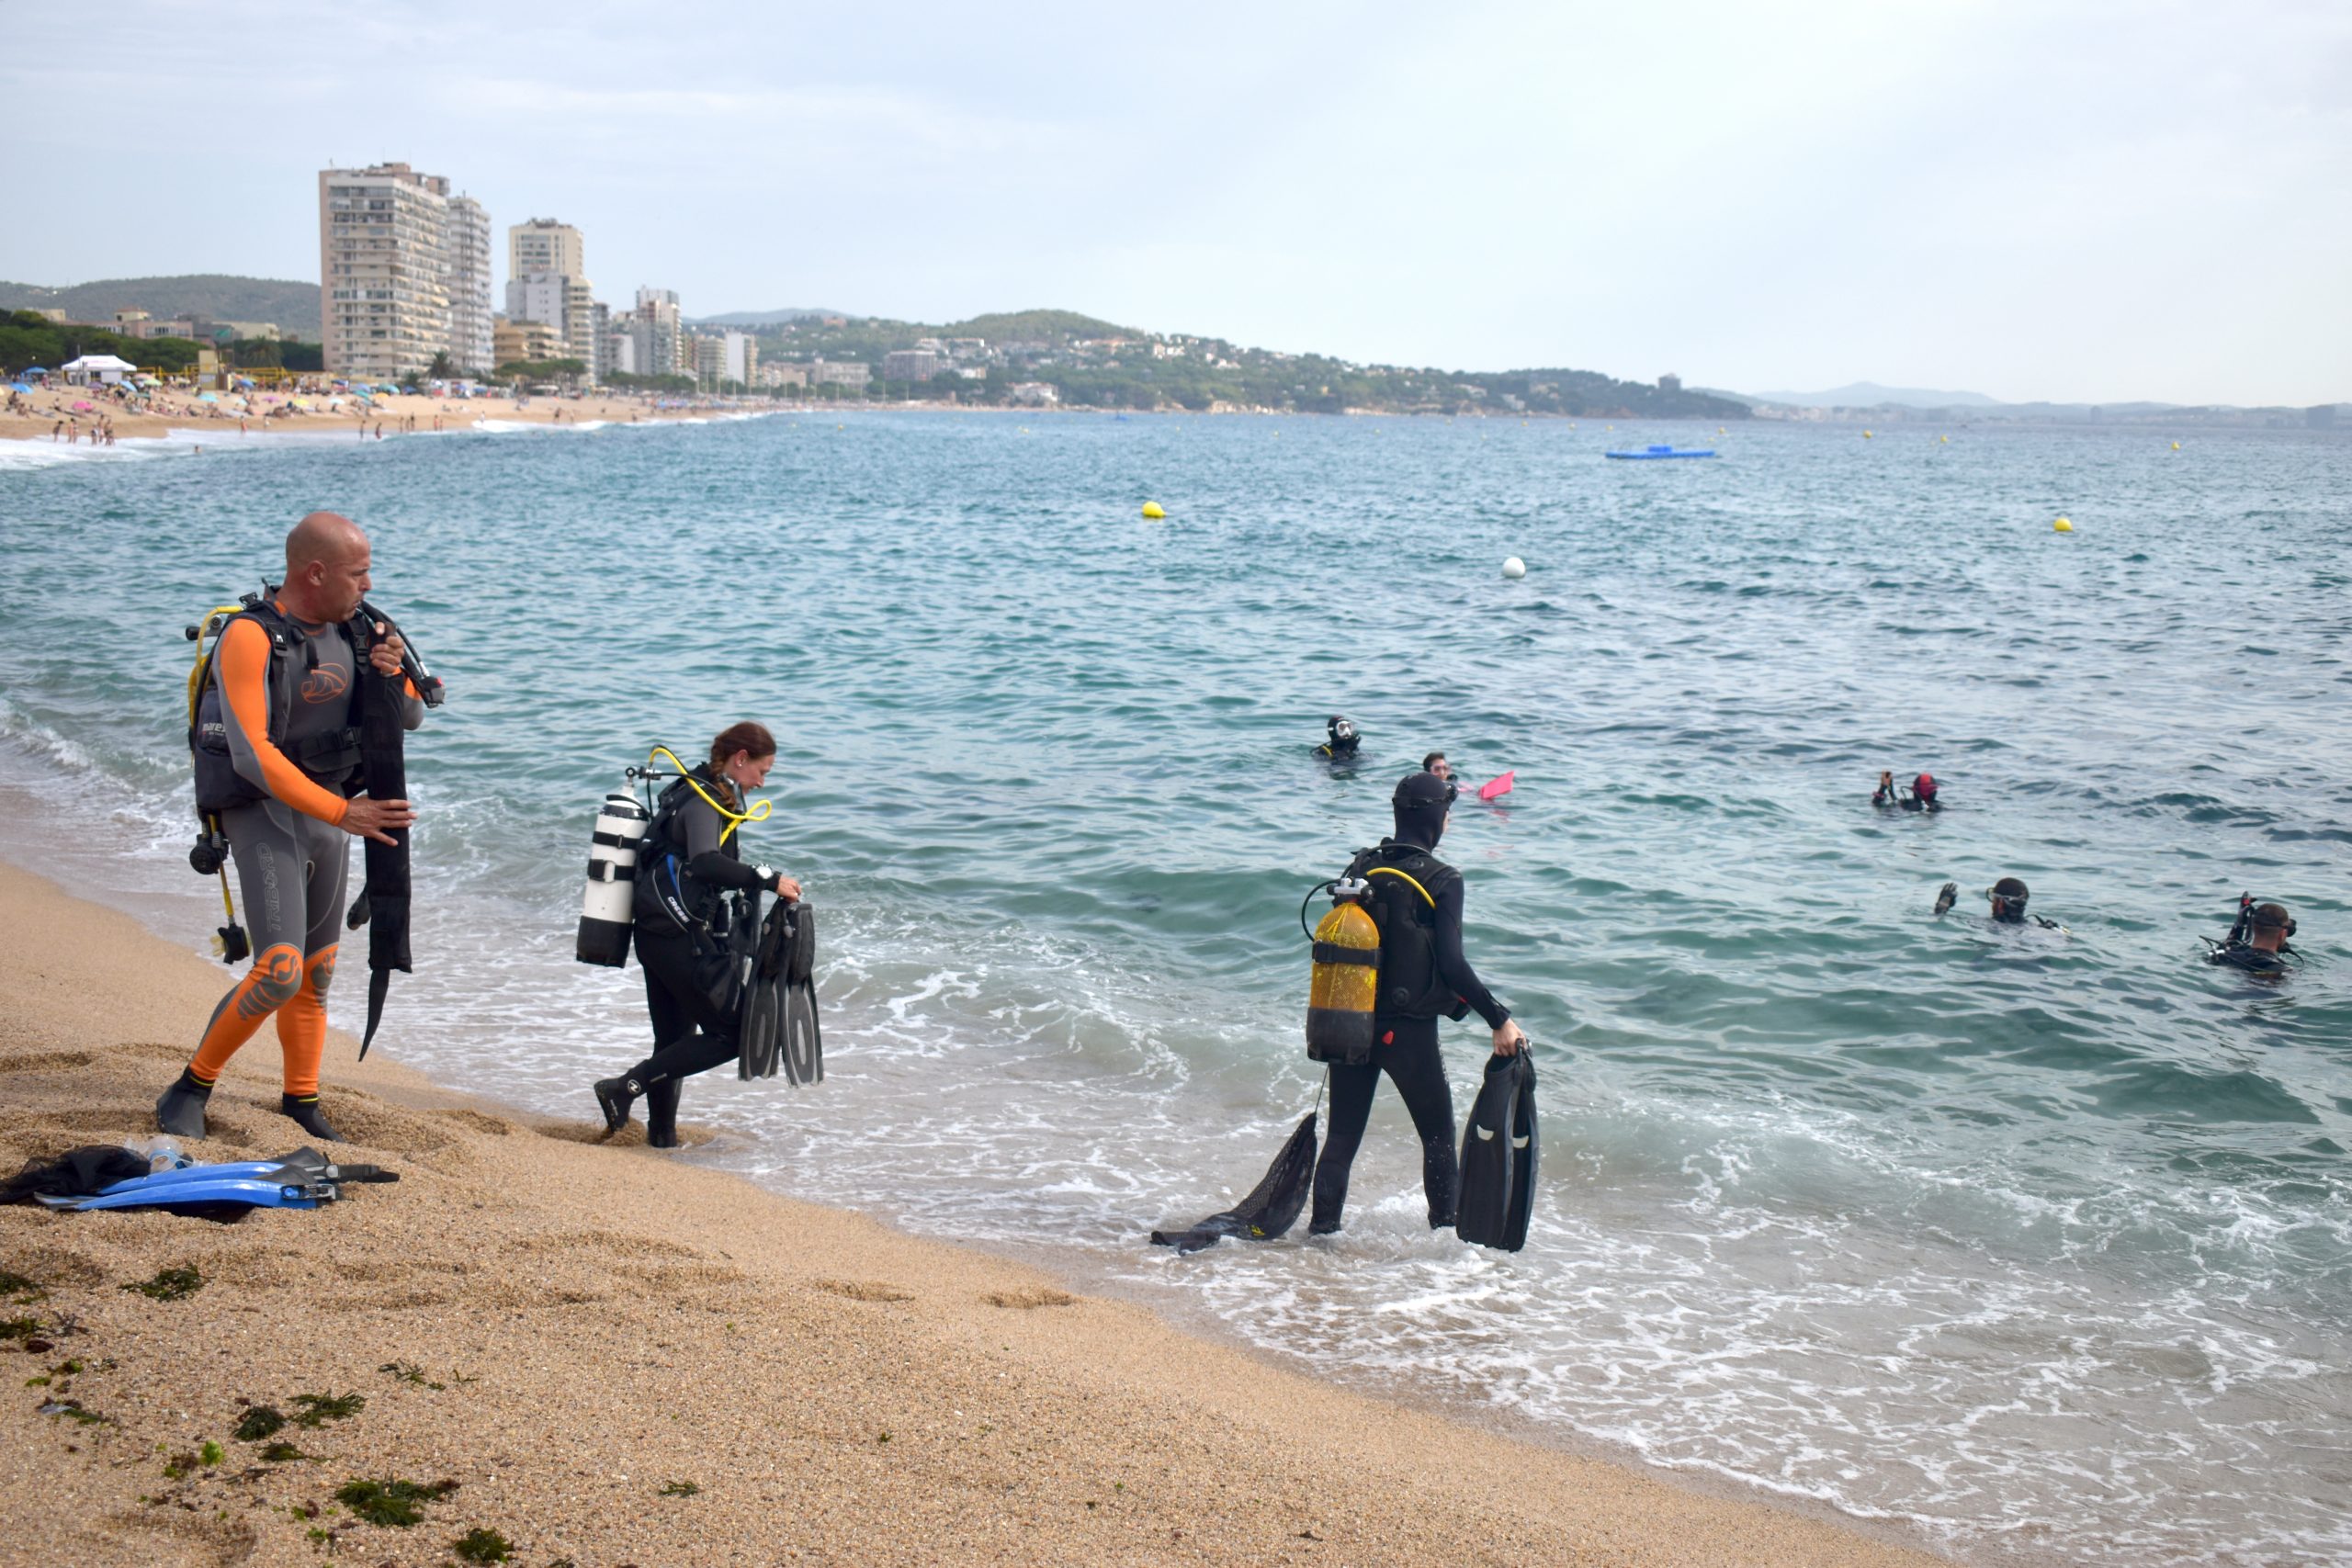 Waste collection with divers in the Mediterranean sea